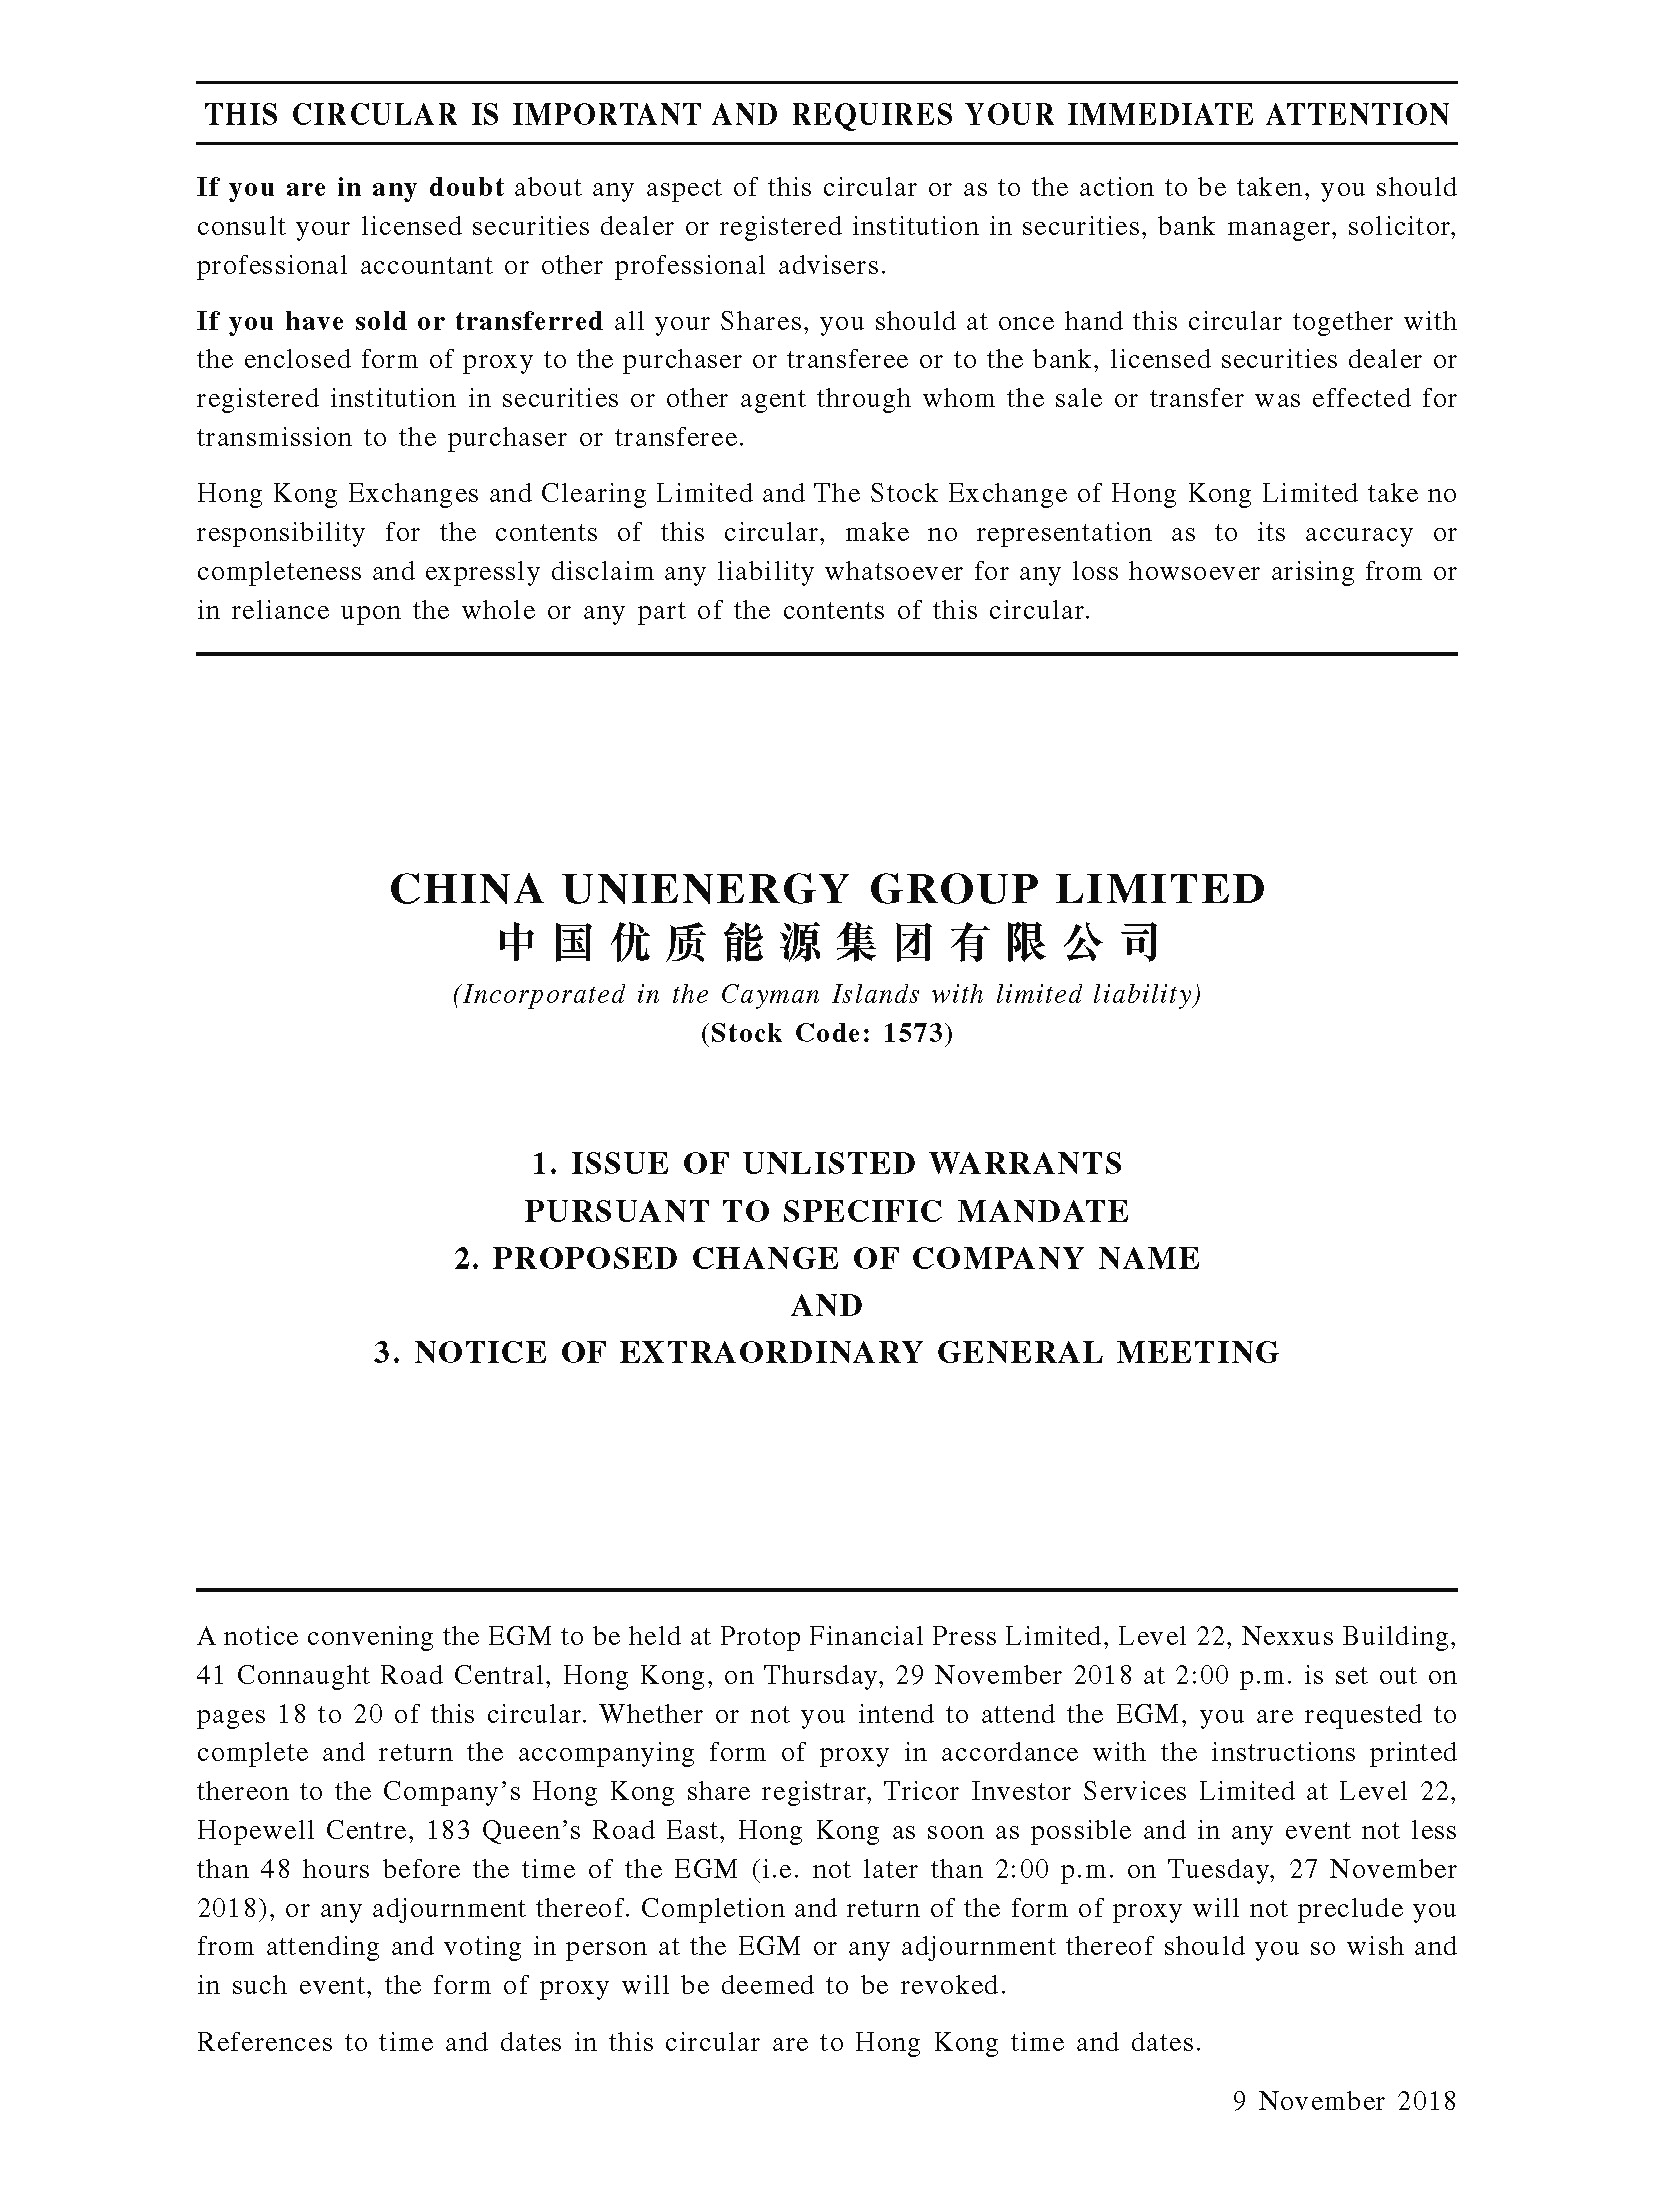 China Unienergy Group Limited